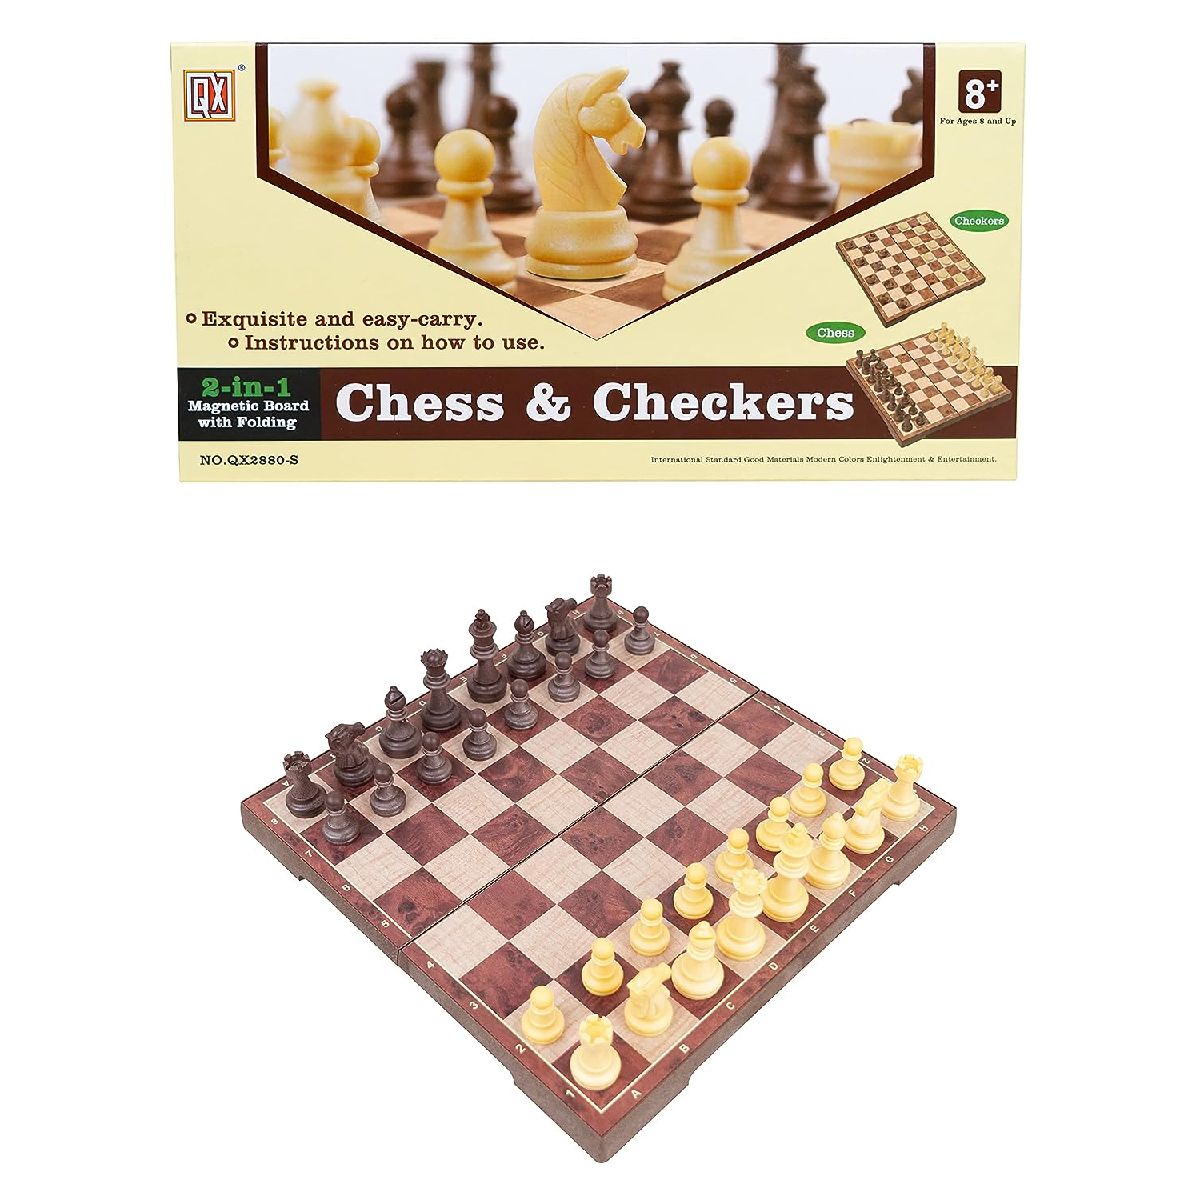 Magnetic Chess Board for Adults - Chess Board Set Wooden And Plastic, Wooden Chess Board Set with Magnetic Pieces, Foldable Chess Board Set, Chess Board for Home and Travel for Kids and Adults